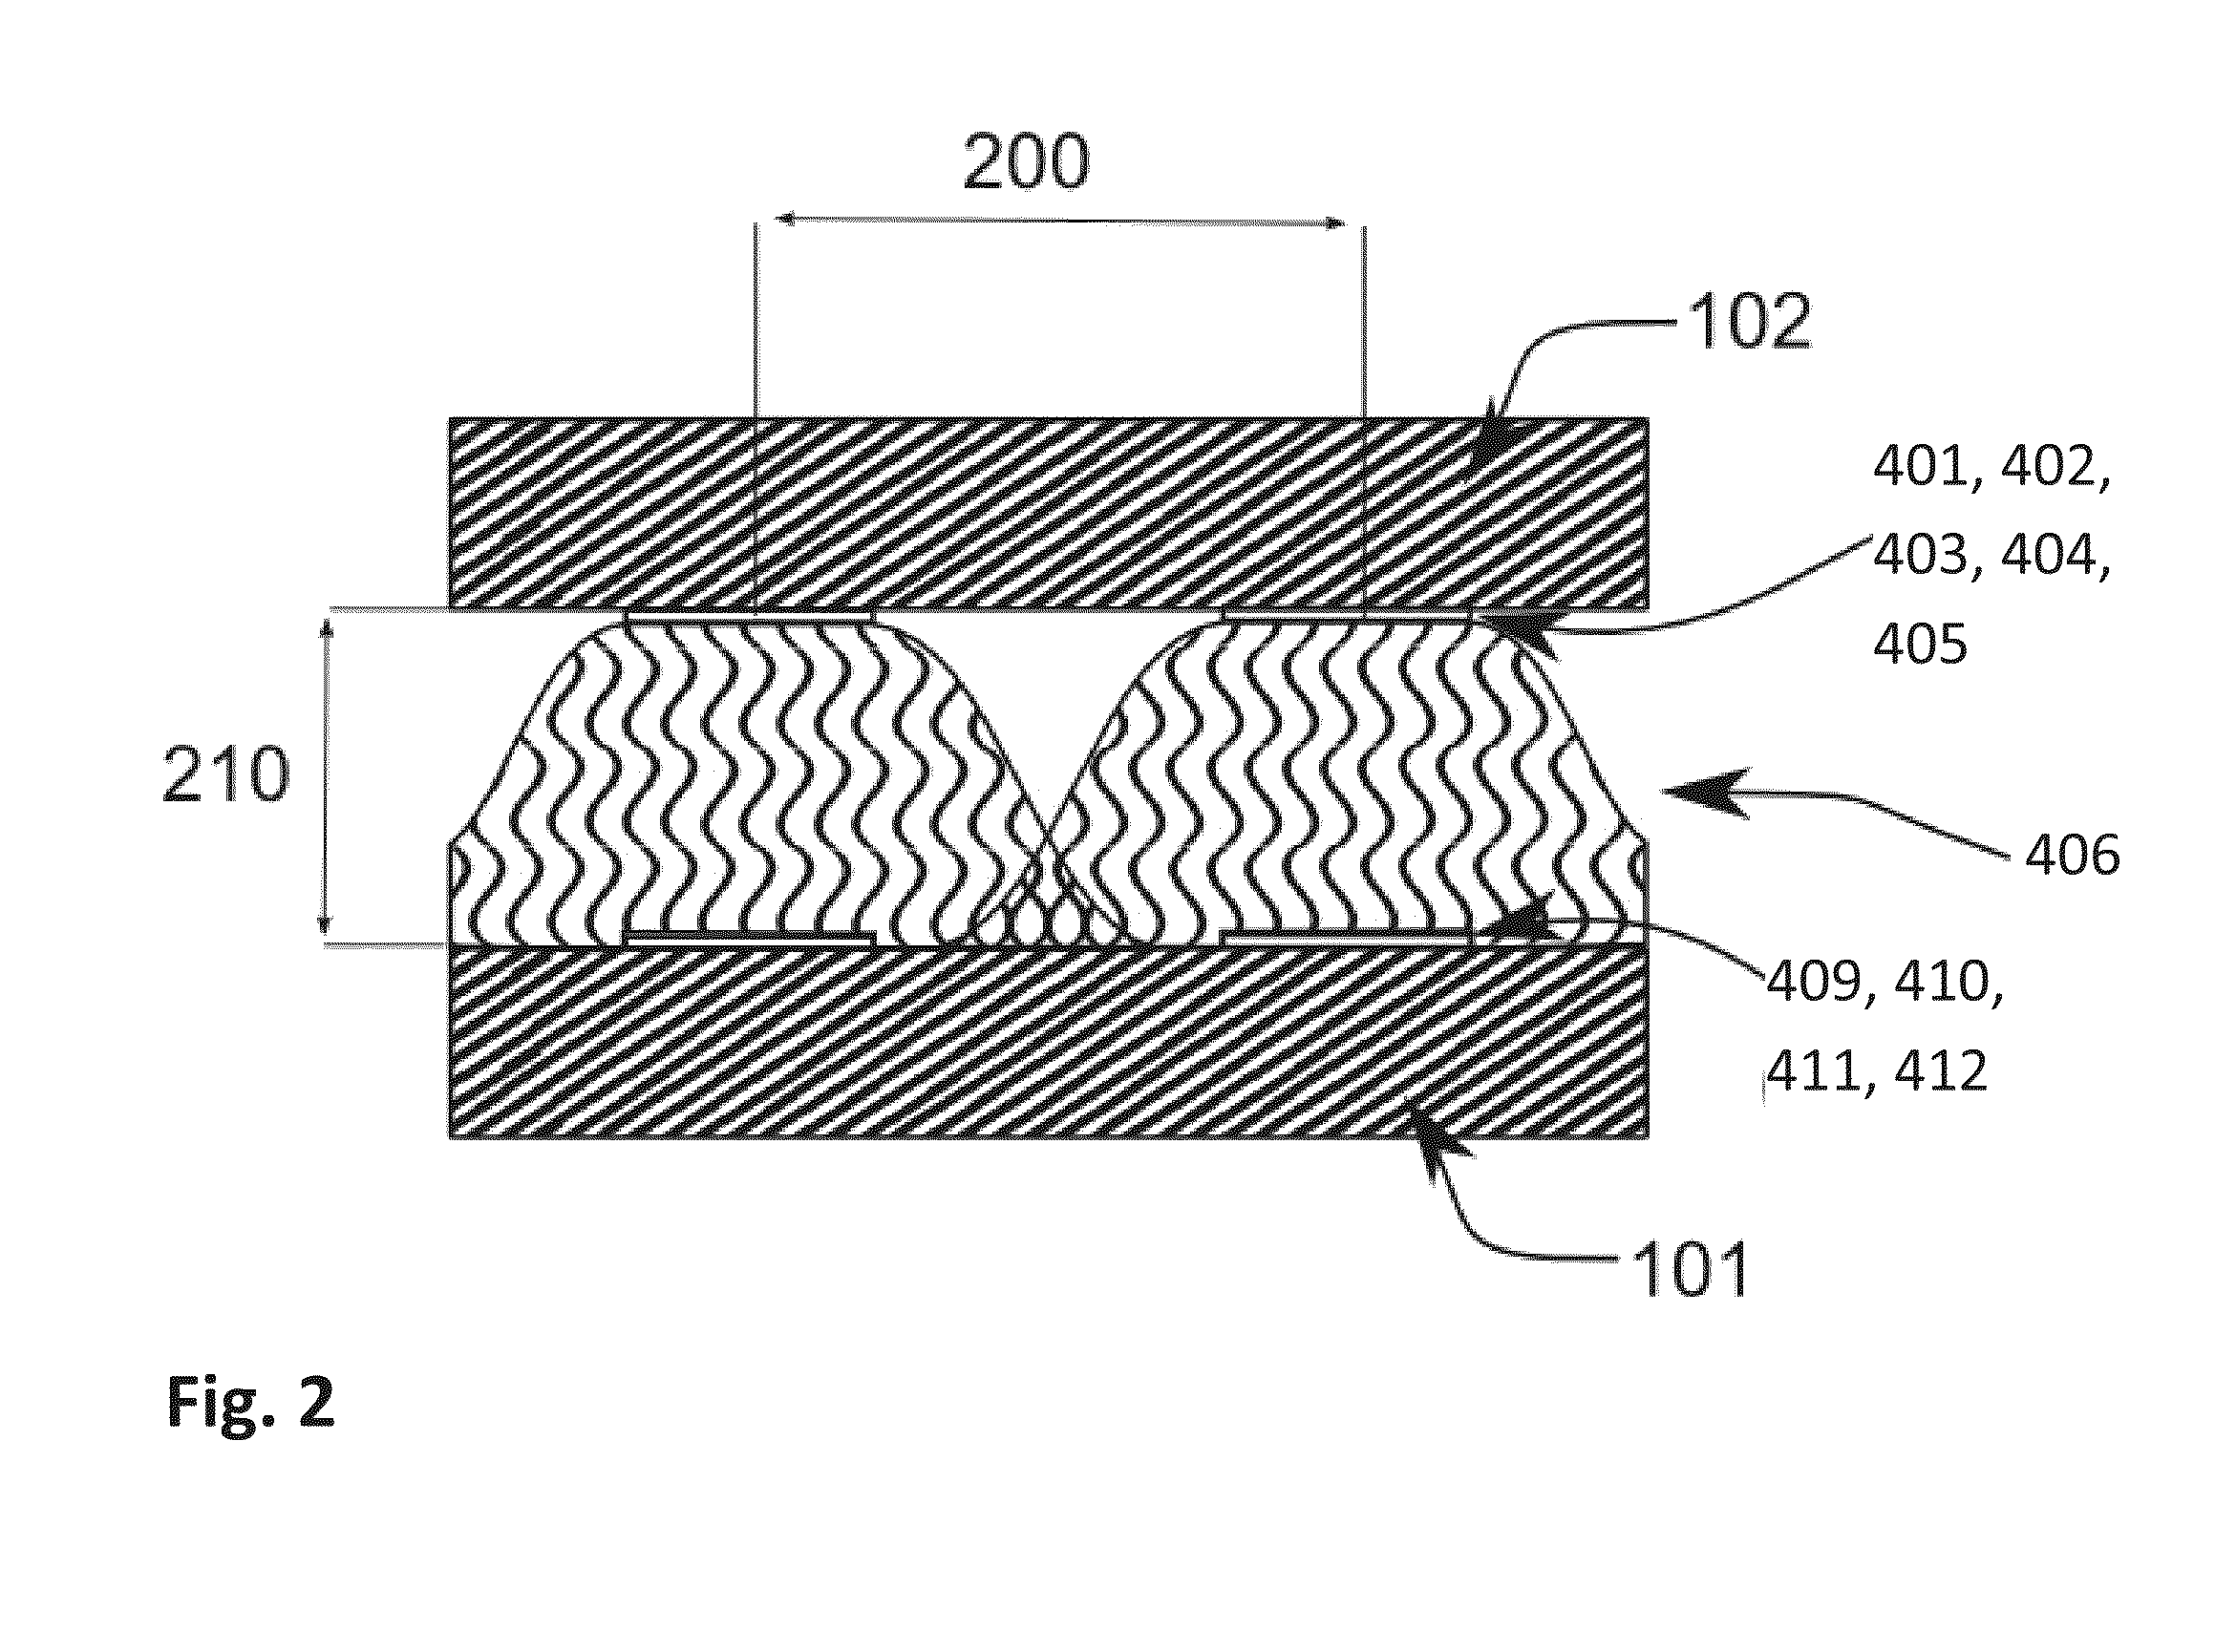 Semiconductor bump-bonded x-ray imaging device